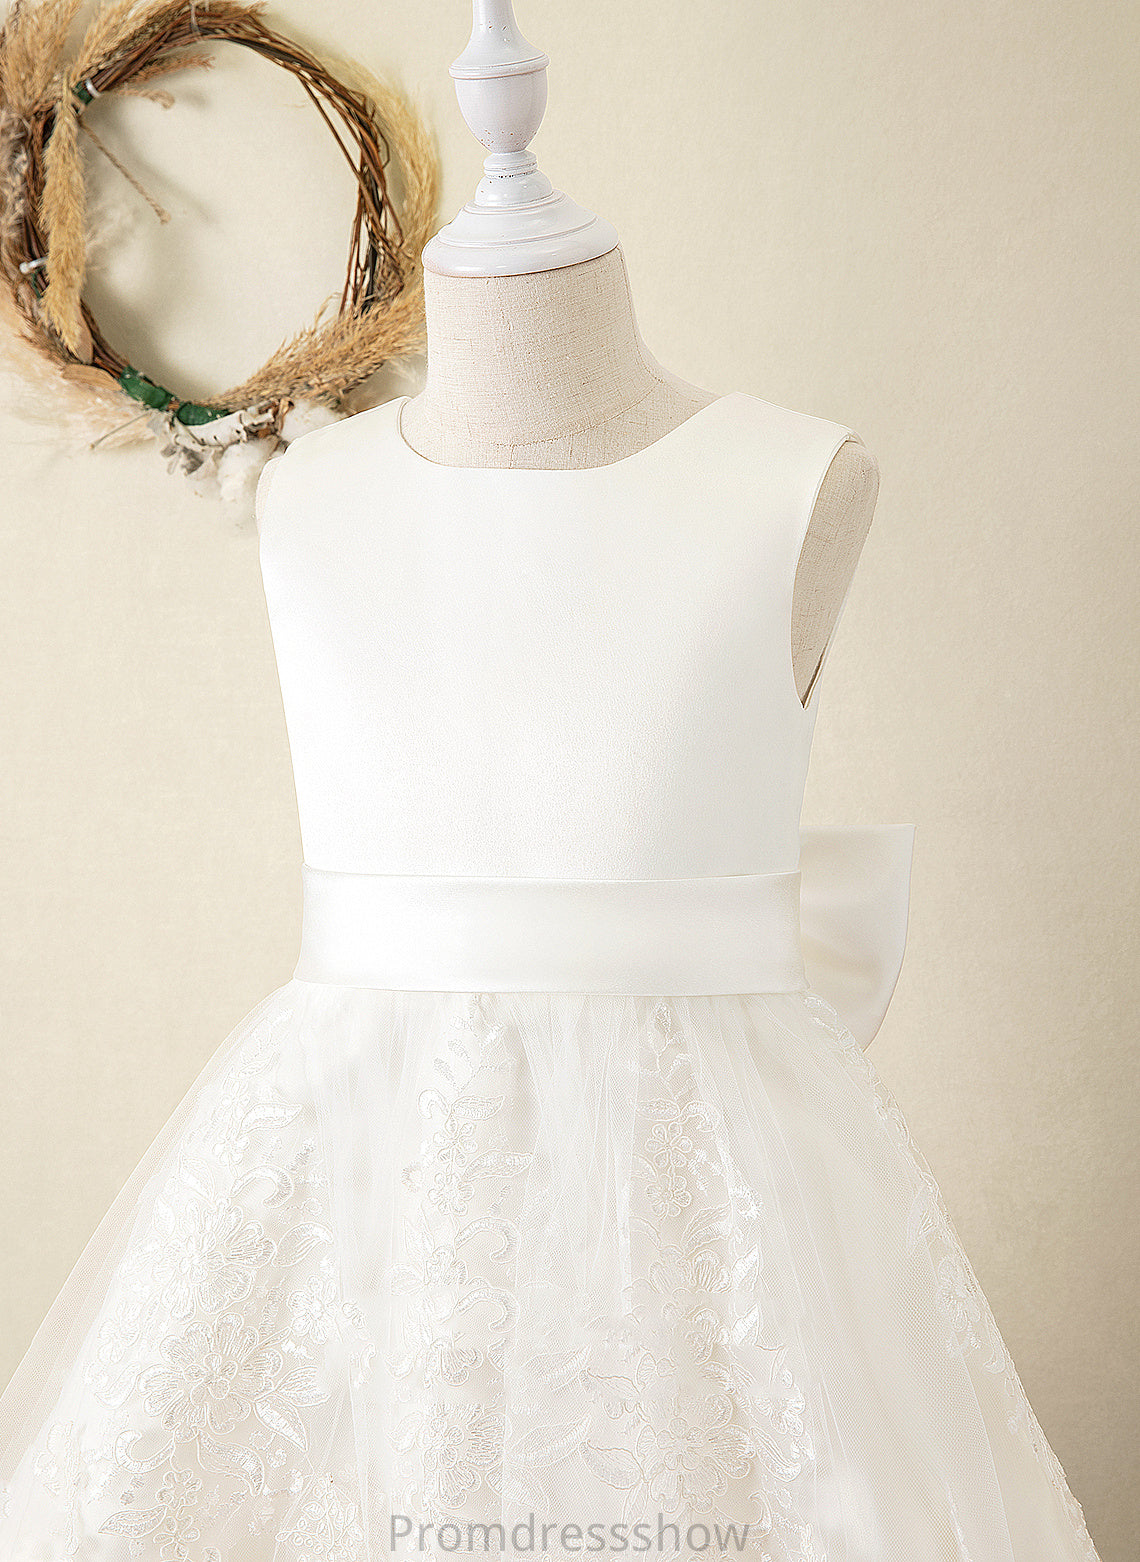 sash) With (Undetachable Addisyn Bow(s) Flower Satin/Lace Flower Girl Dresses Neck - Scoop Sleeveless Girl Knee-length Ball-Gown/Princess Dress